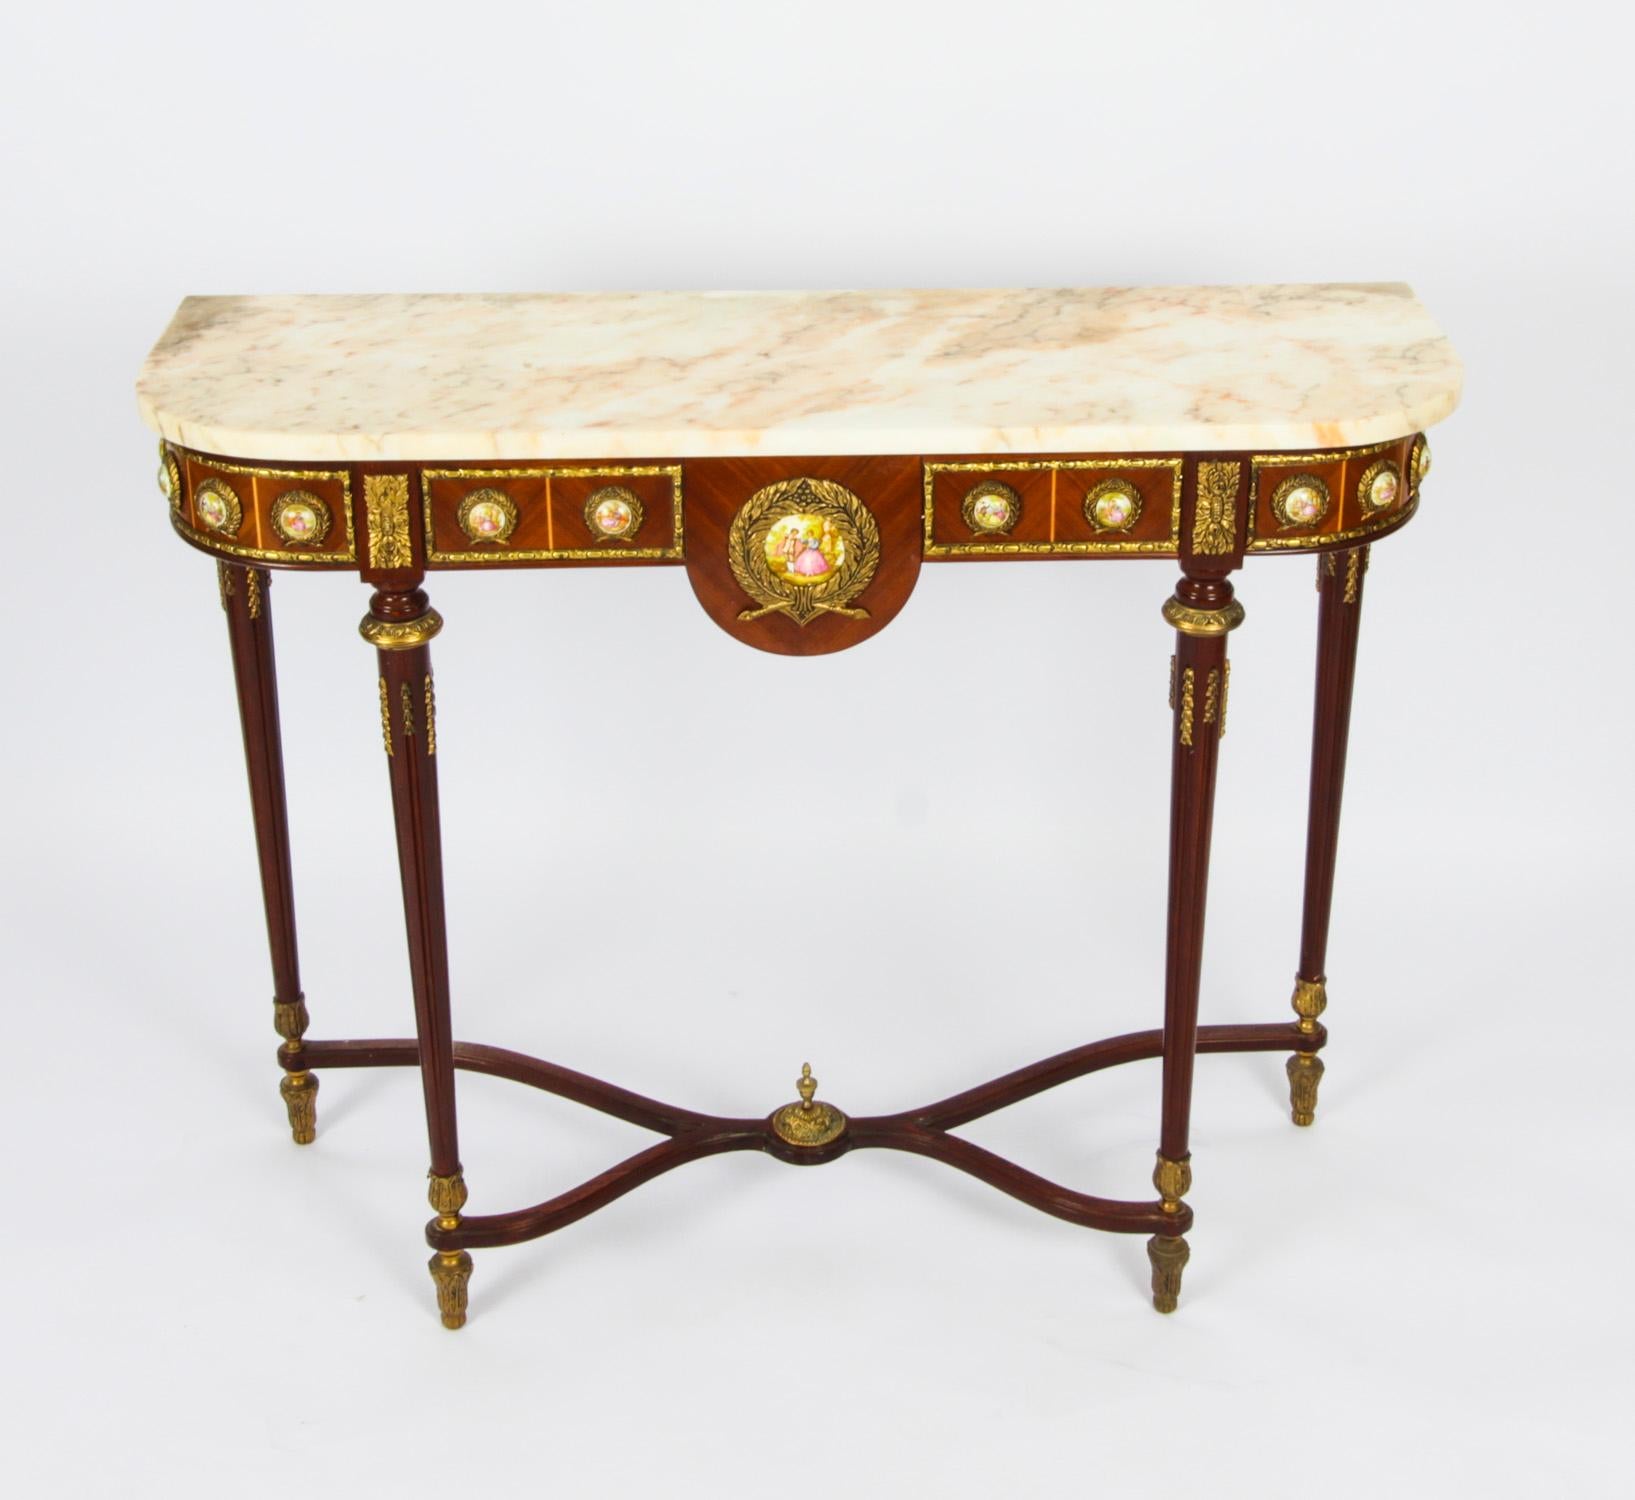 This is an elegant Louis Revival console table and mirror by the renowned cabinet maker H & L Epstein, dating from mid 20th century.

These magnificent pieces are crafted from wood with stunnning ormolu mounts and the console features fourteen